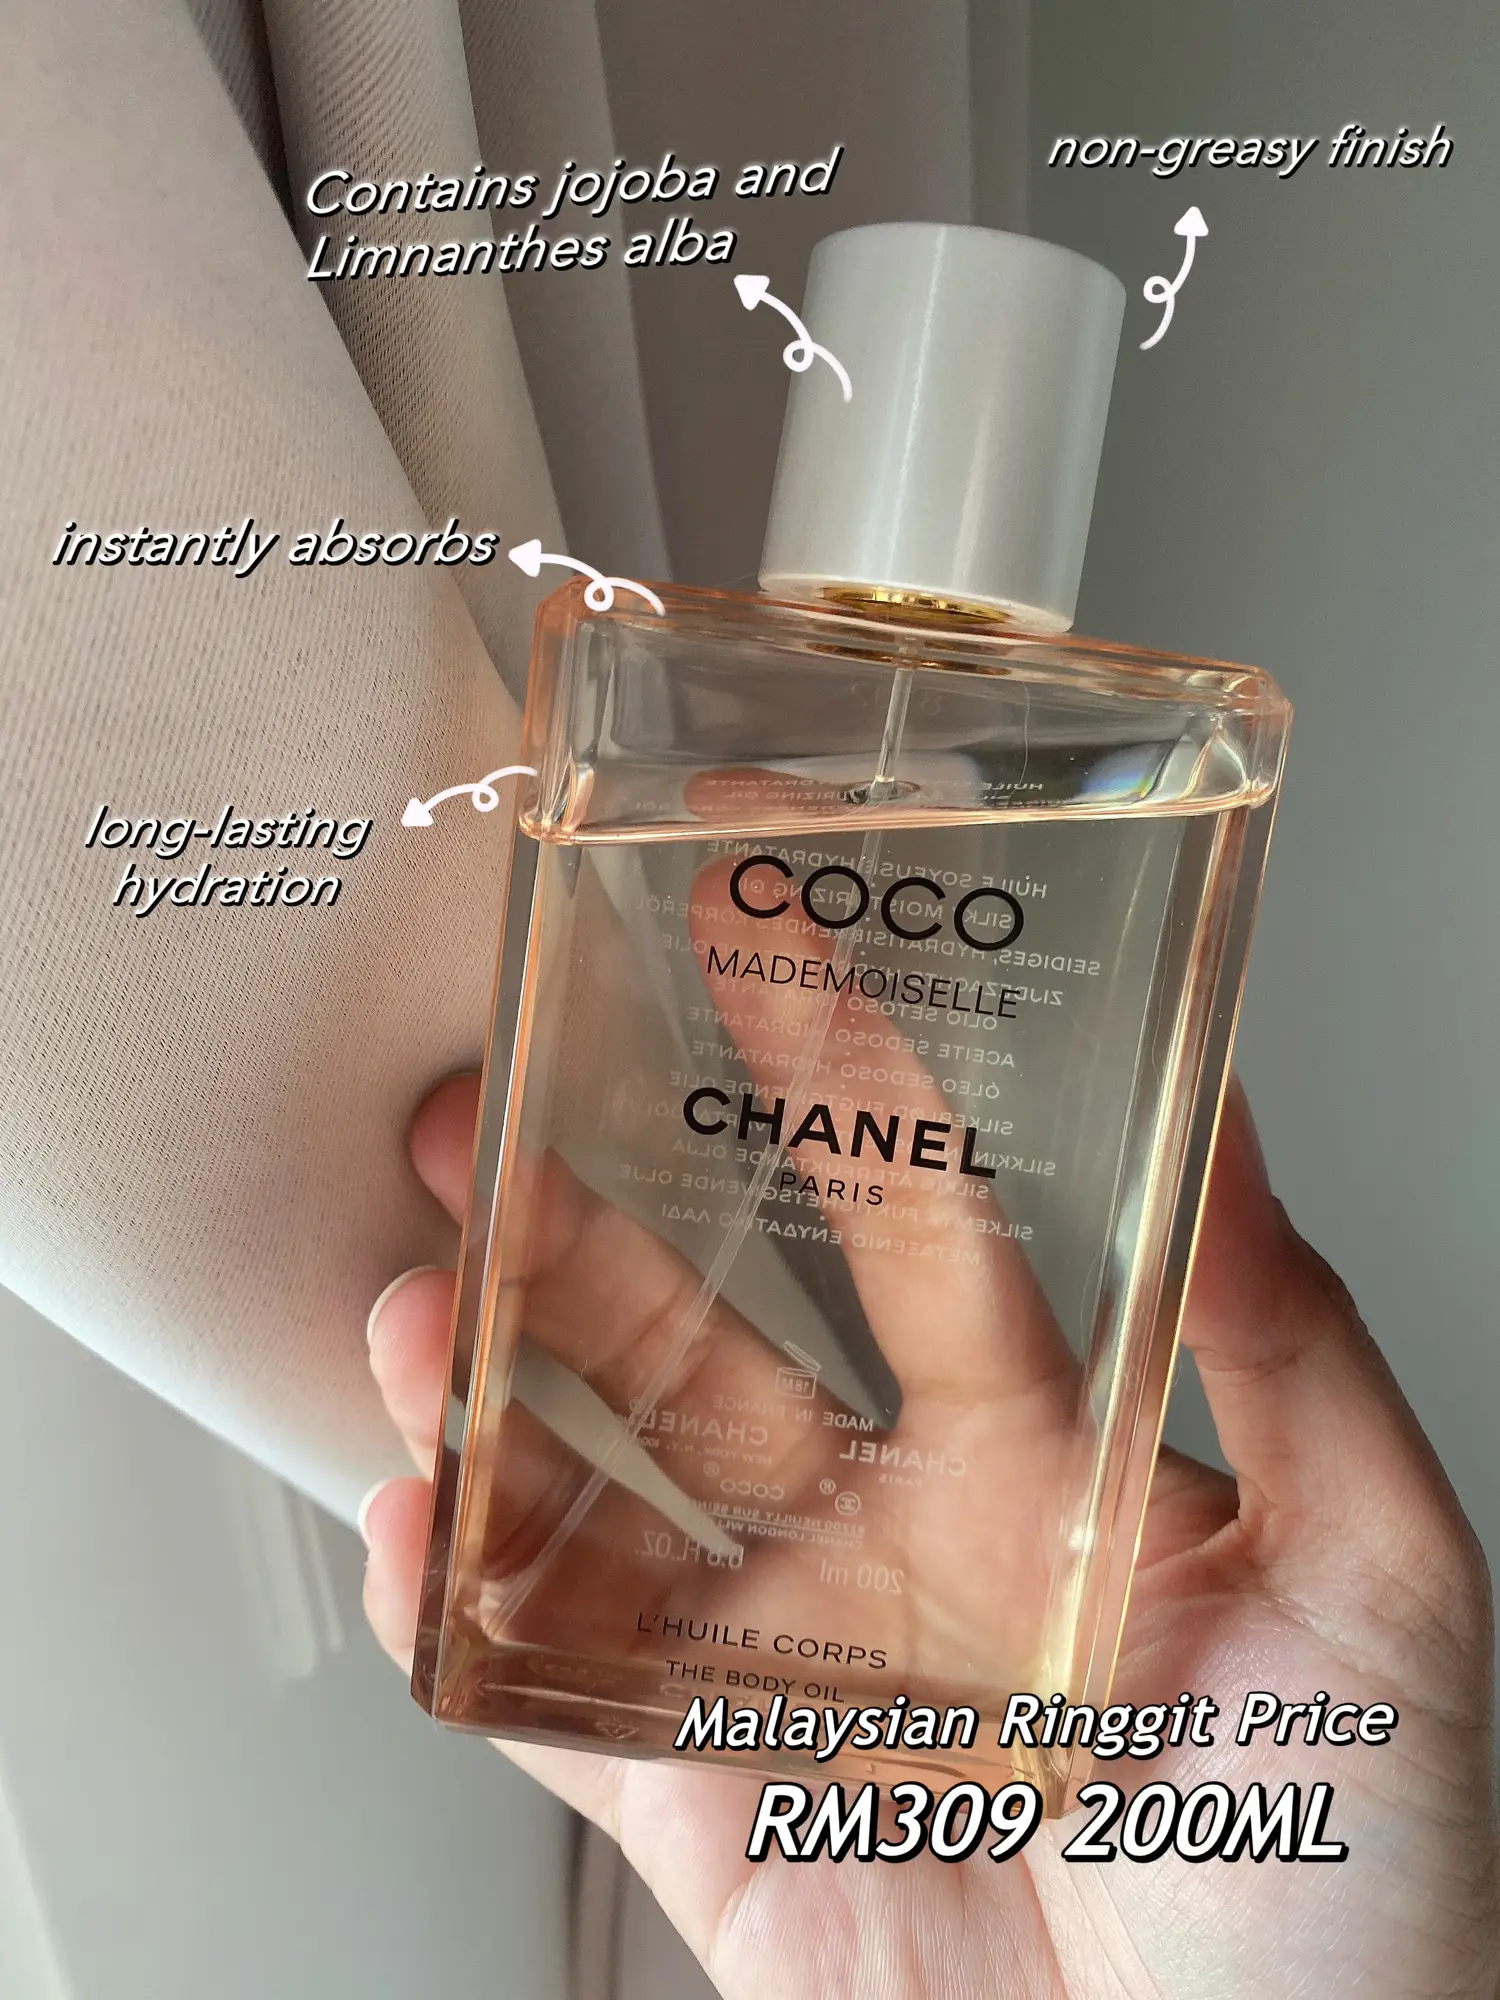 Chanel Body Oil - is it worth it?, Gallery posted by J.Danielle Fzii